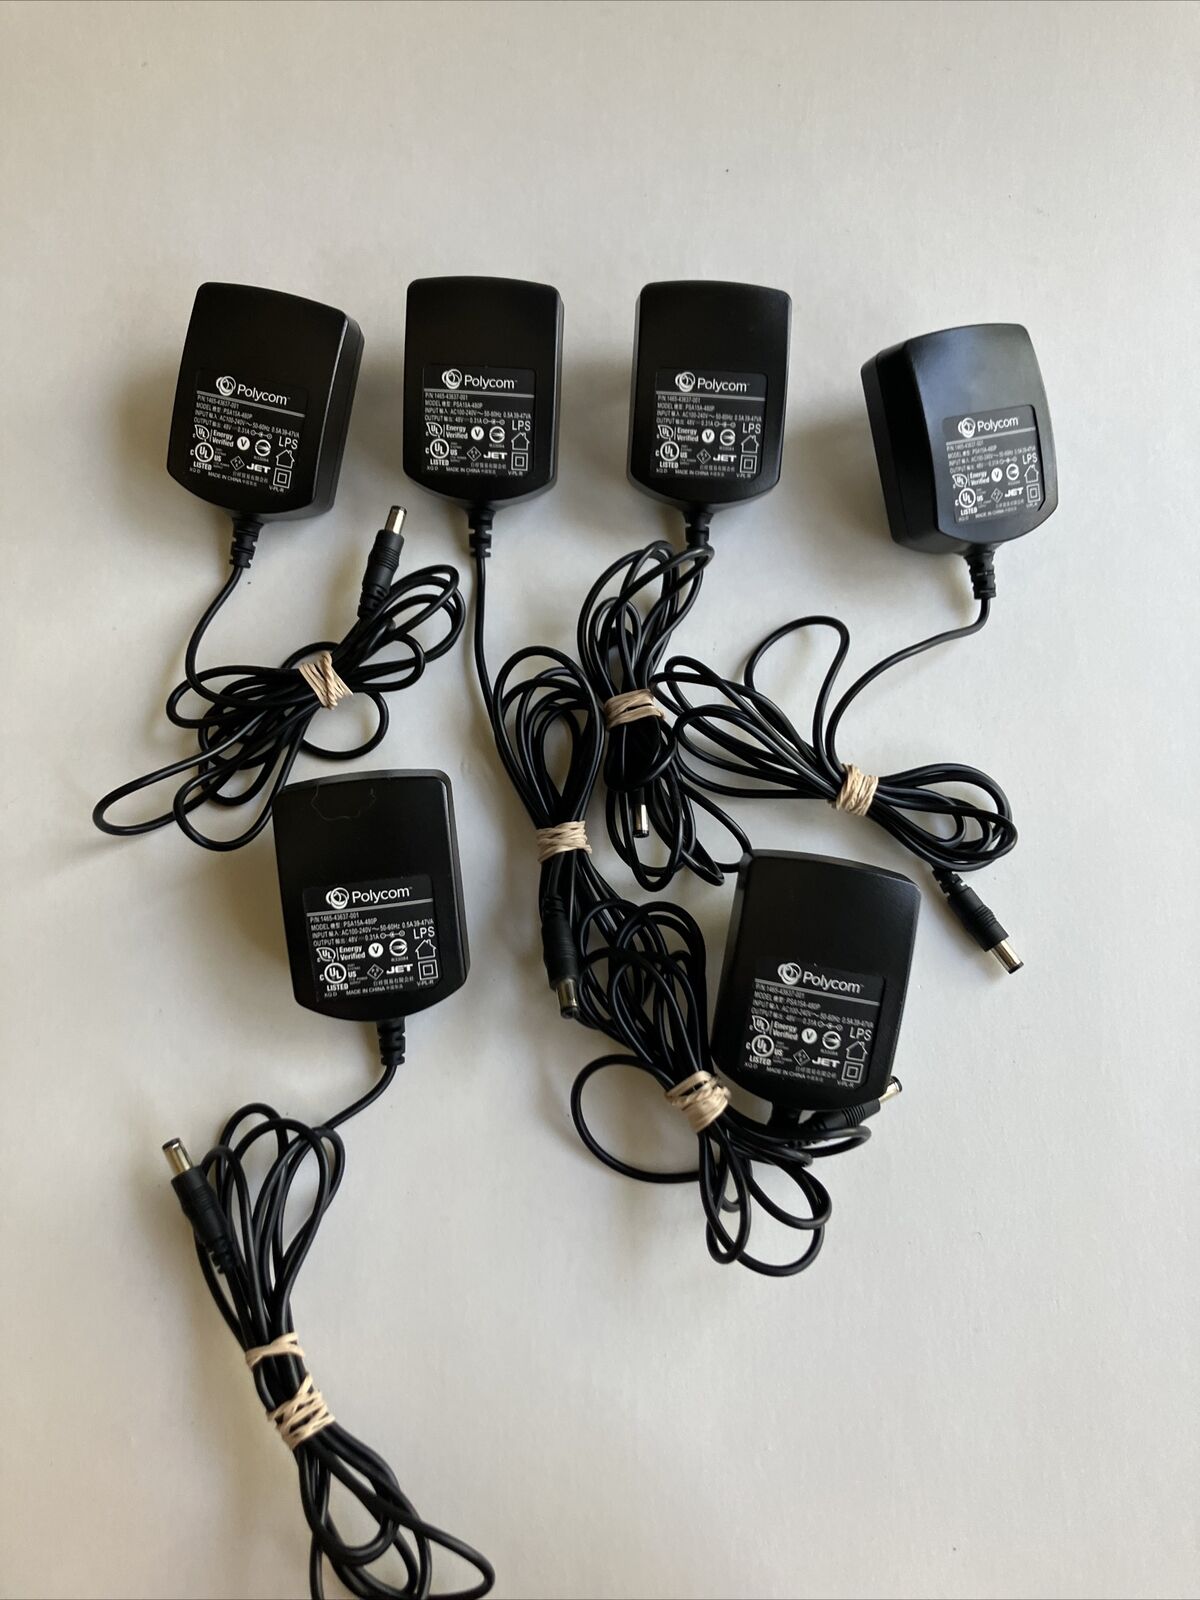 Lot of 6 OEM Polycom AC Power Supply Adapters 48V 0.31A VoIP Phones PSA15A-480P